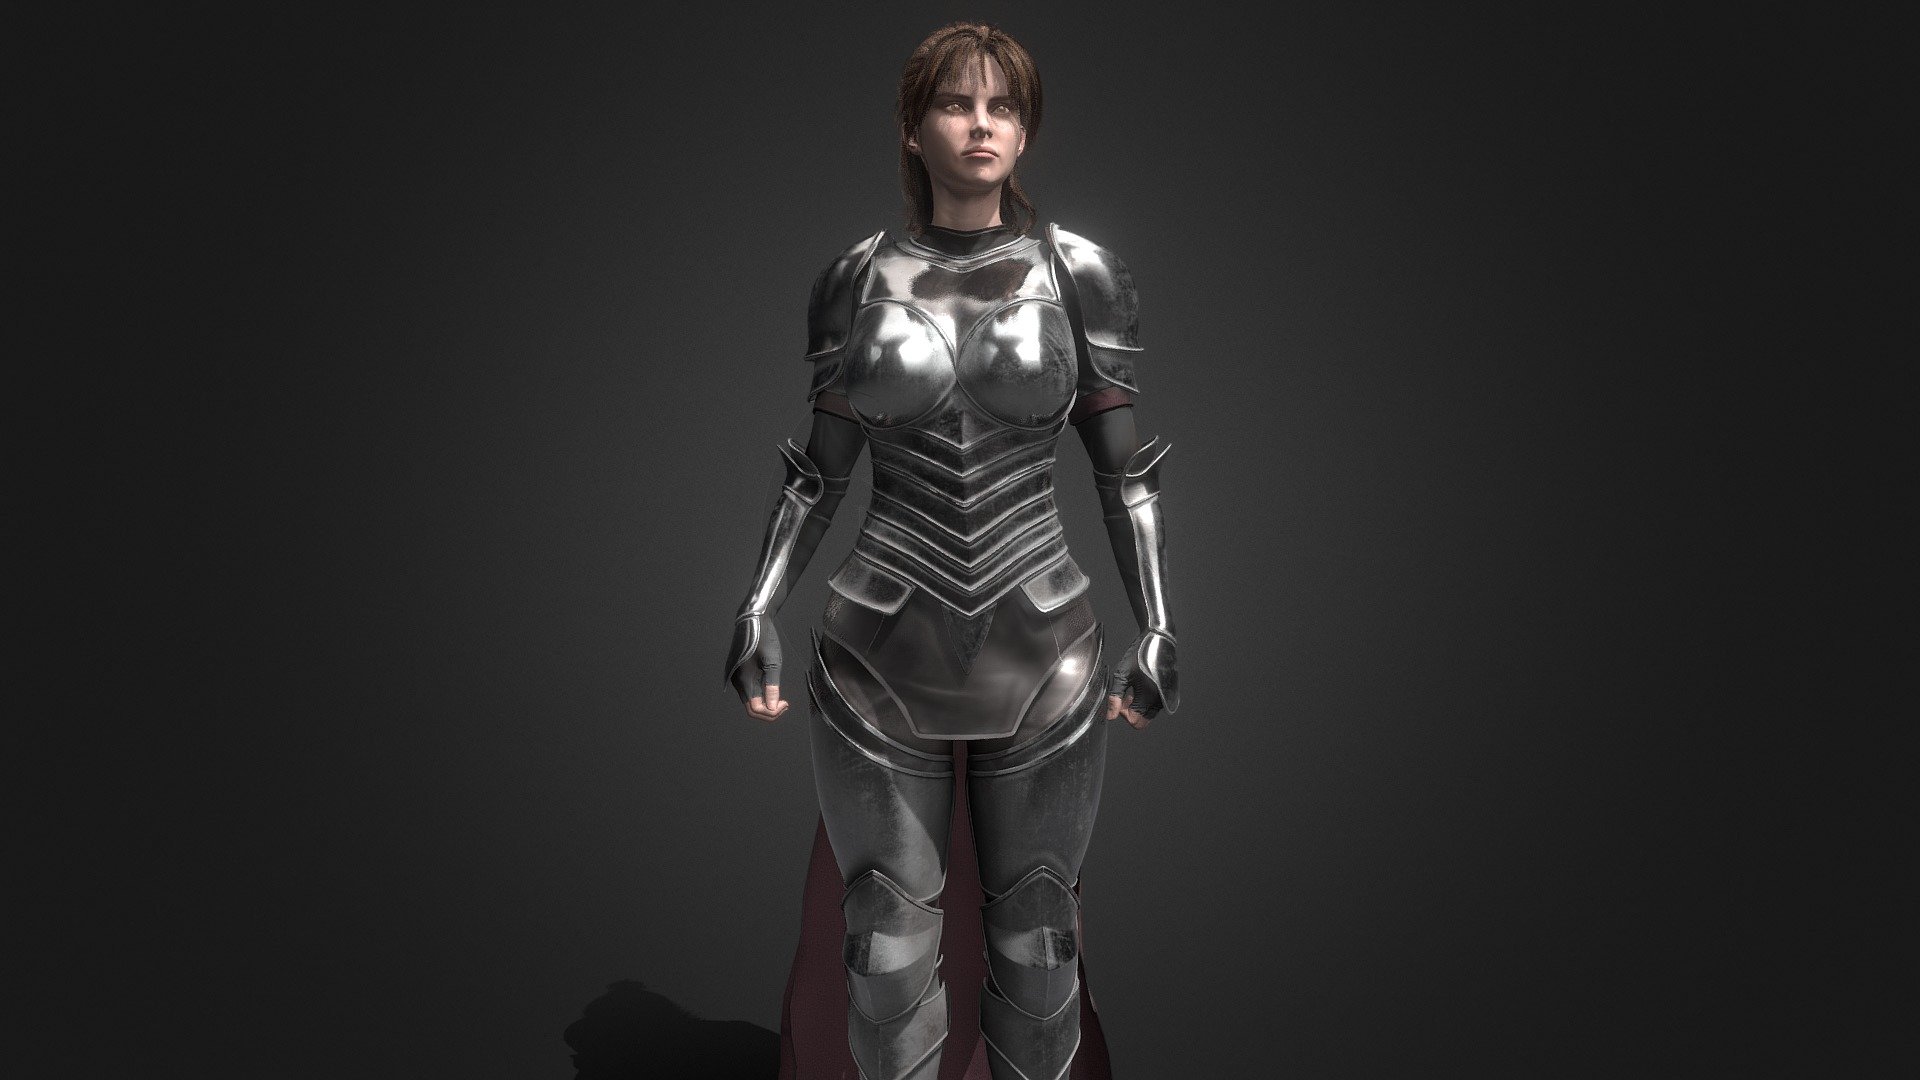 A fantasy inspired female Hero!

Designed in Med-Poly PBR including Albedo, Normal, Metallic, AO, and Roughness 2K textures.

This model is fully rigged as a humanoid and ready to animate in your 3D software or Game Engine!

153,733 Triangles 3d model